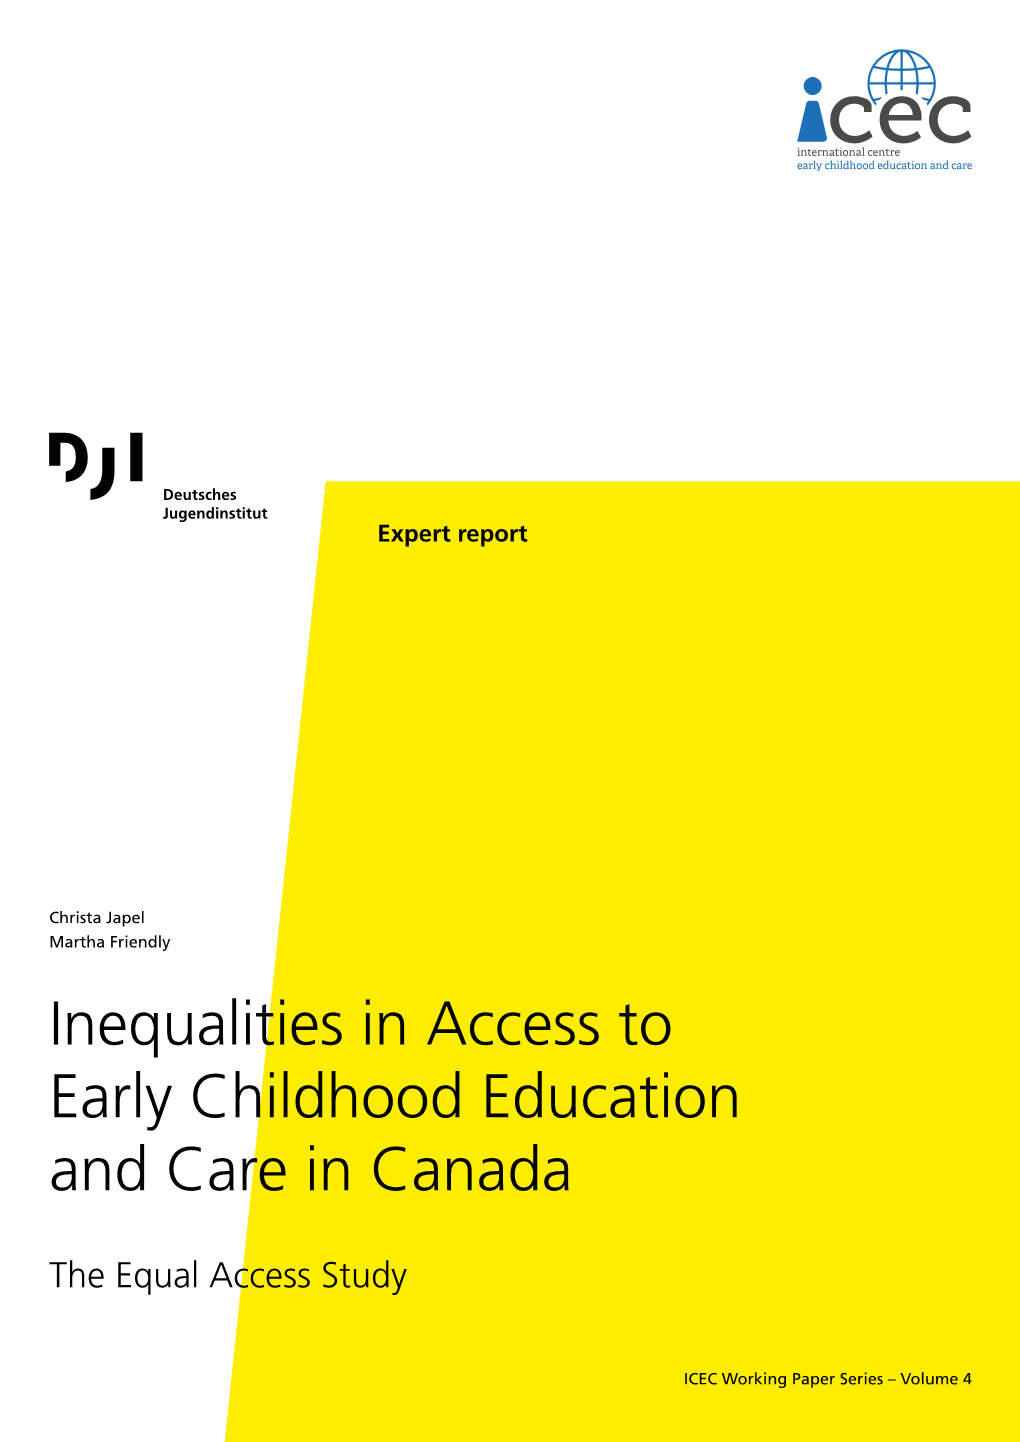 Inequalities in Access to Early Childhood Education and Care in Canada